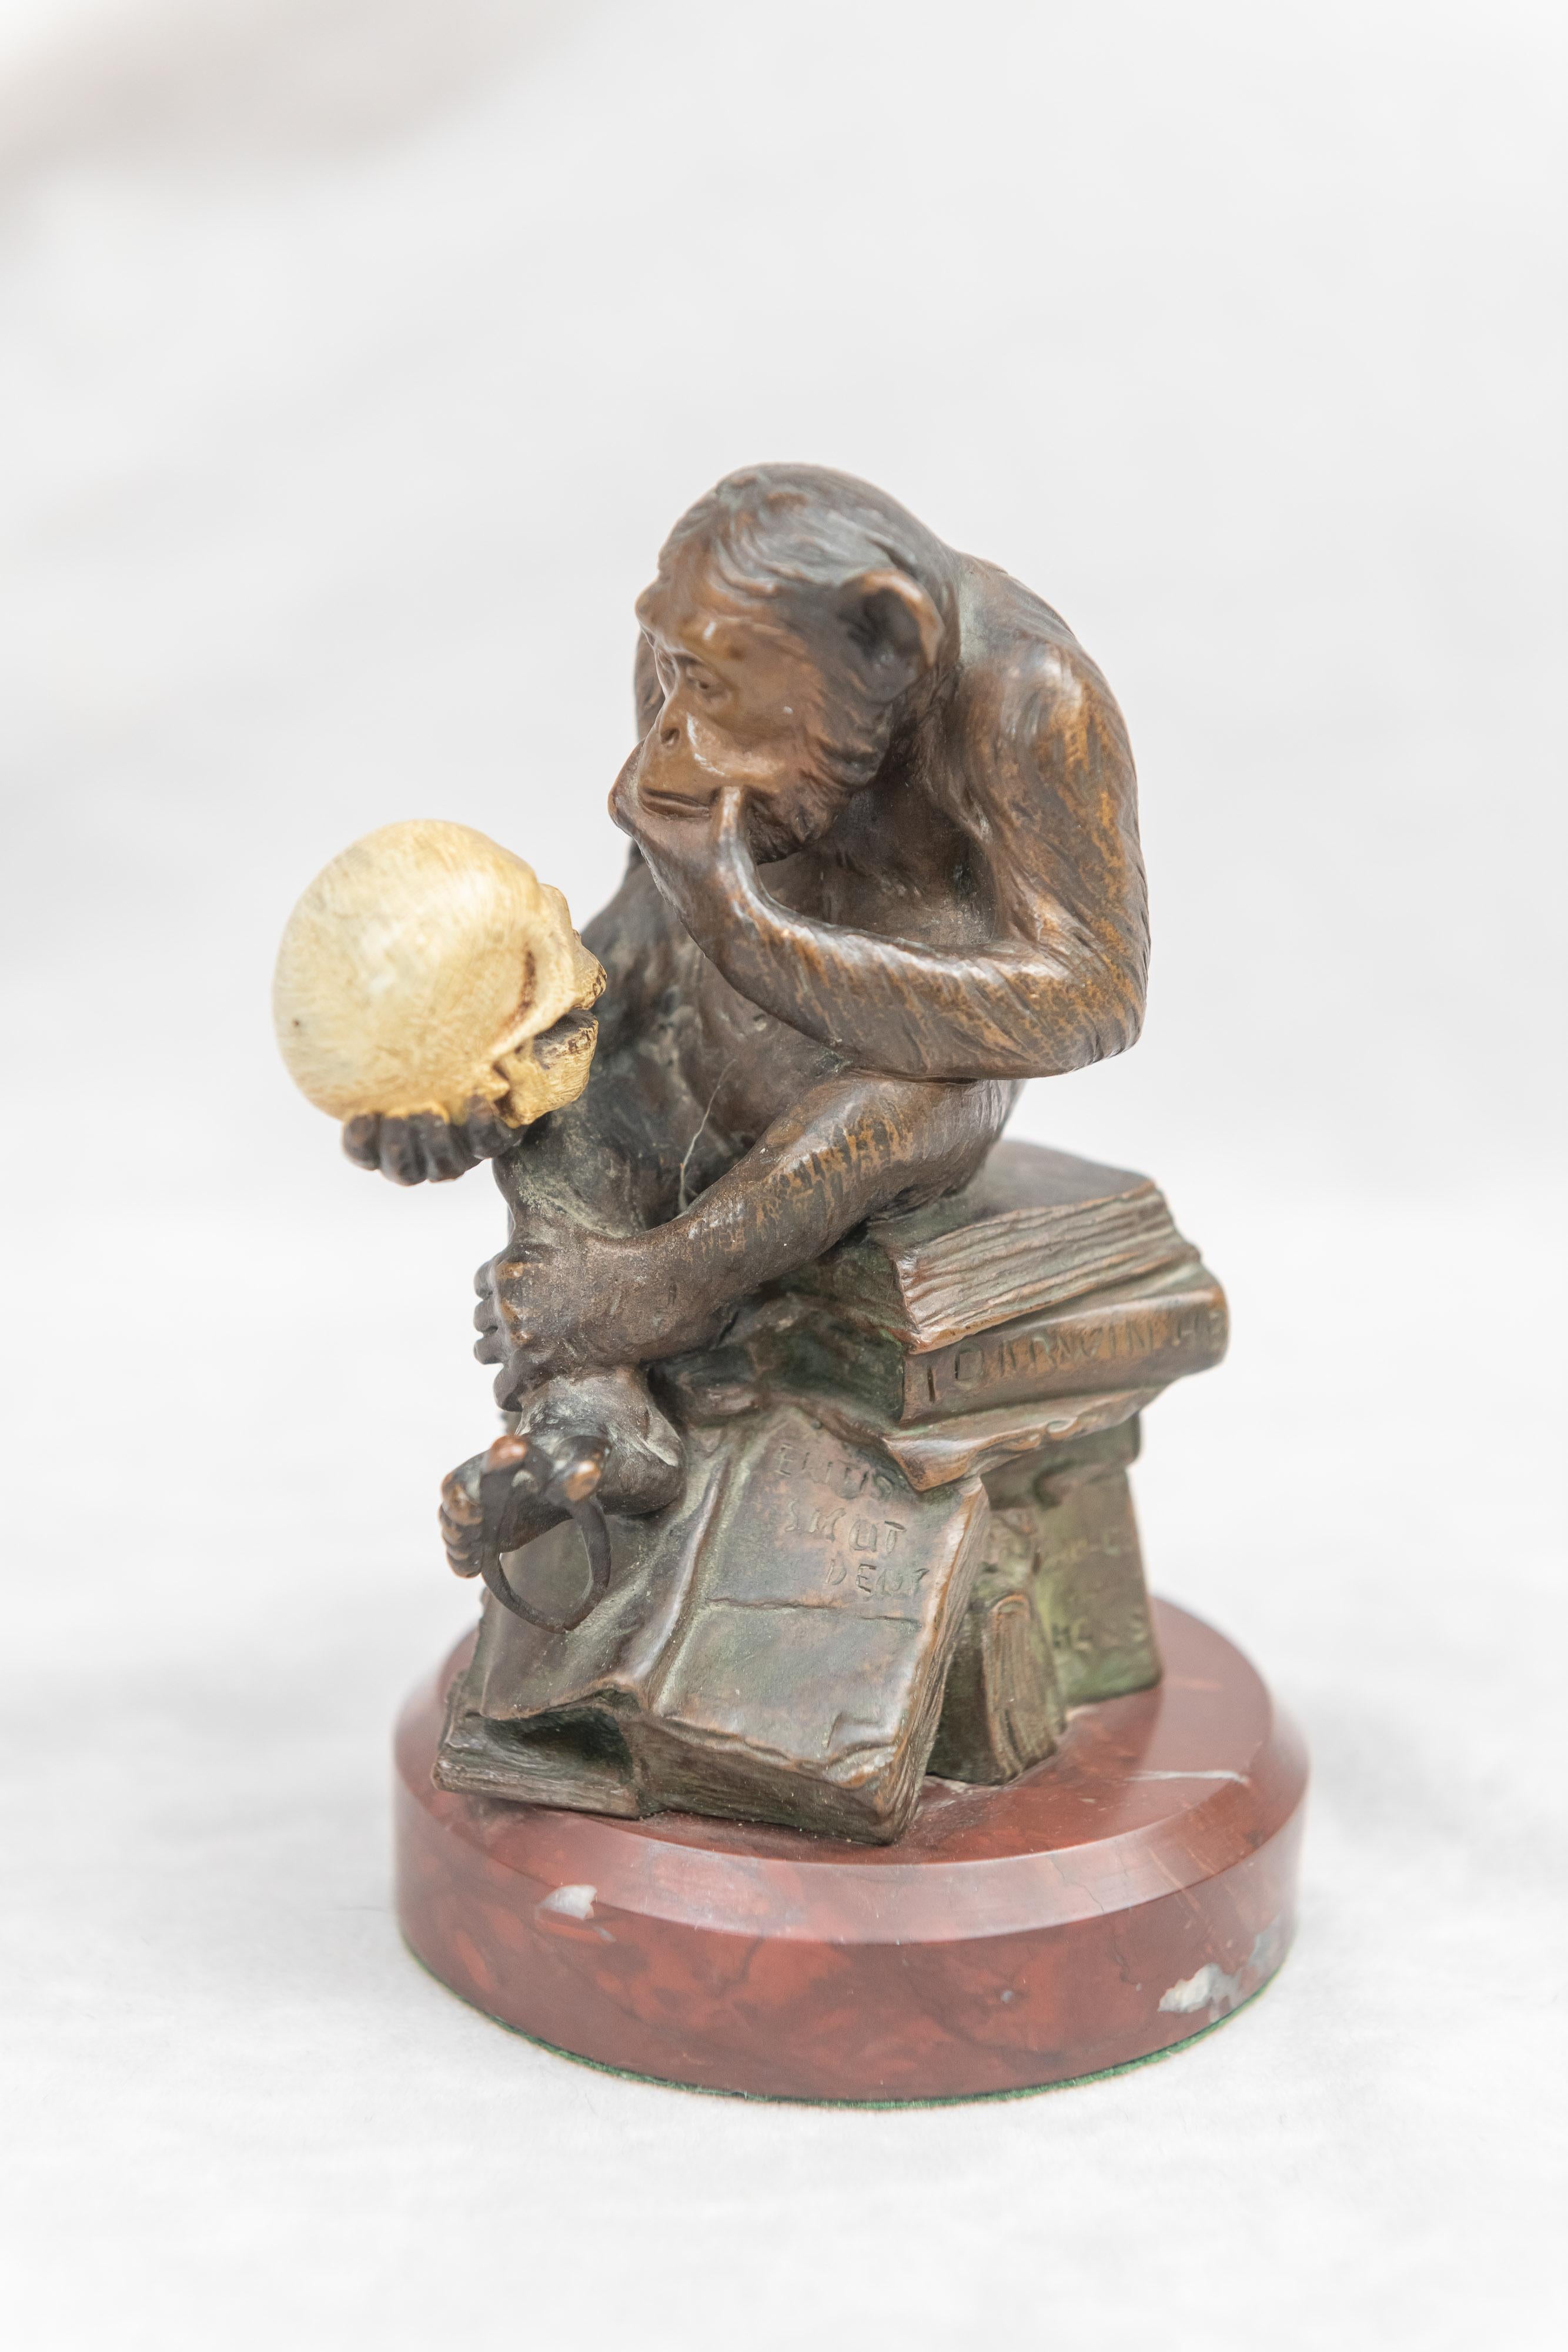 This is the best of our appreciation of whimsy. Here's the monkey holding a human skull (cold painted bronze) and also holding a caliper. He is sitting atop a book by Darwin. He is trying to understand if he is related to us human beings. The